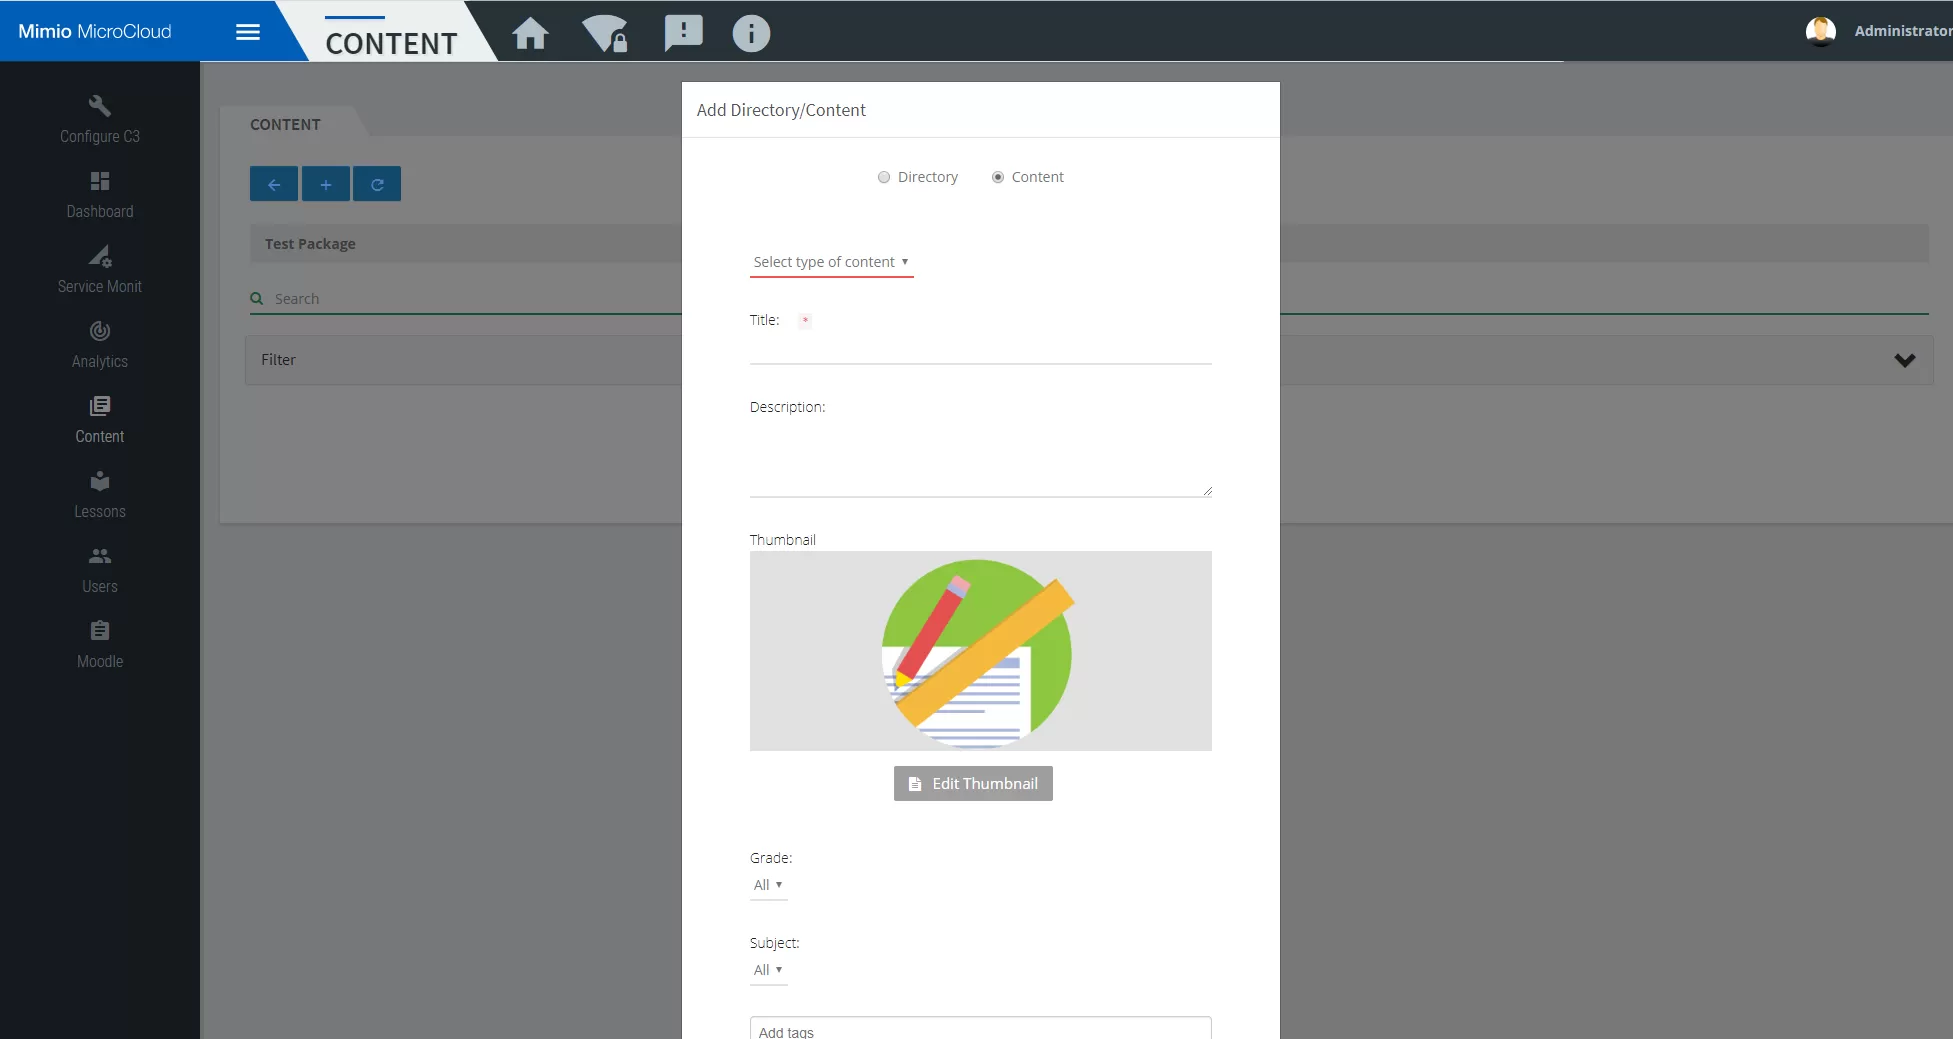 Content creation screen on Mimio Microcloud